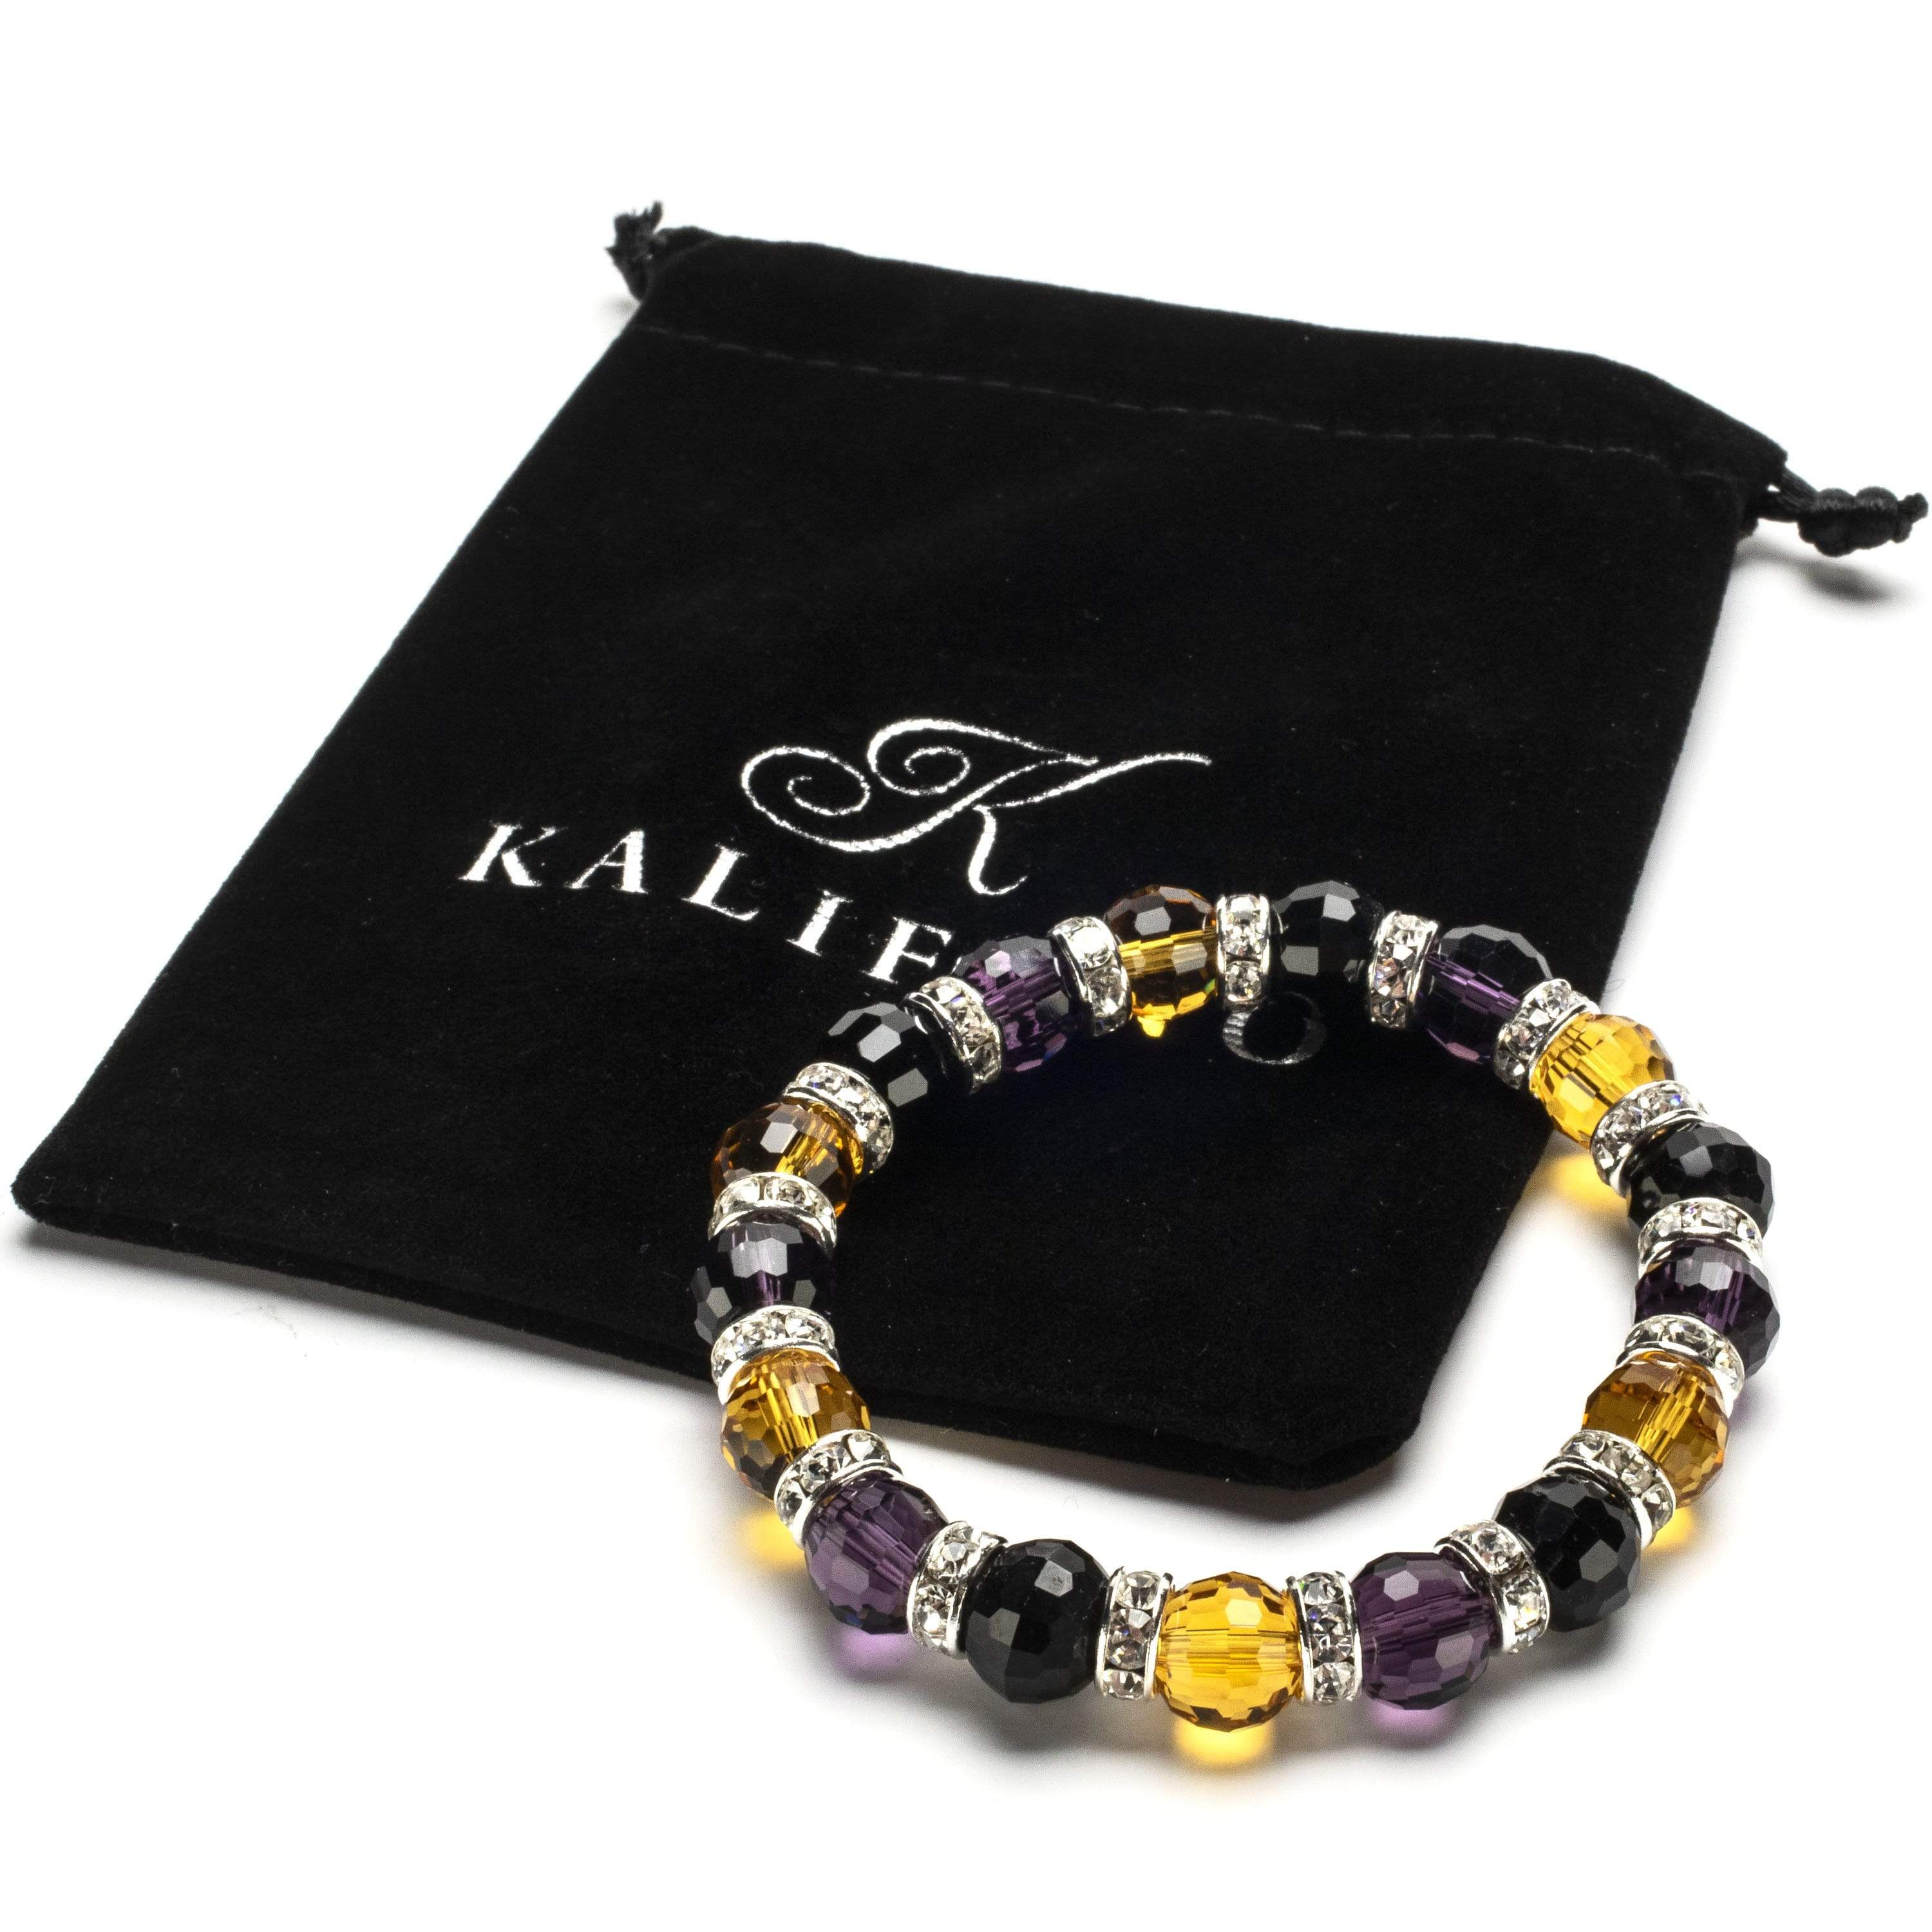 Kalifano Gorgeous Glass Jewelry Multicolored Gorgeous Glass Bracelet with Cubic Zirconia Crystals BLUE-BGG-N05